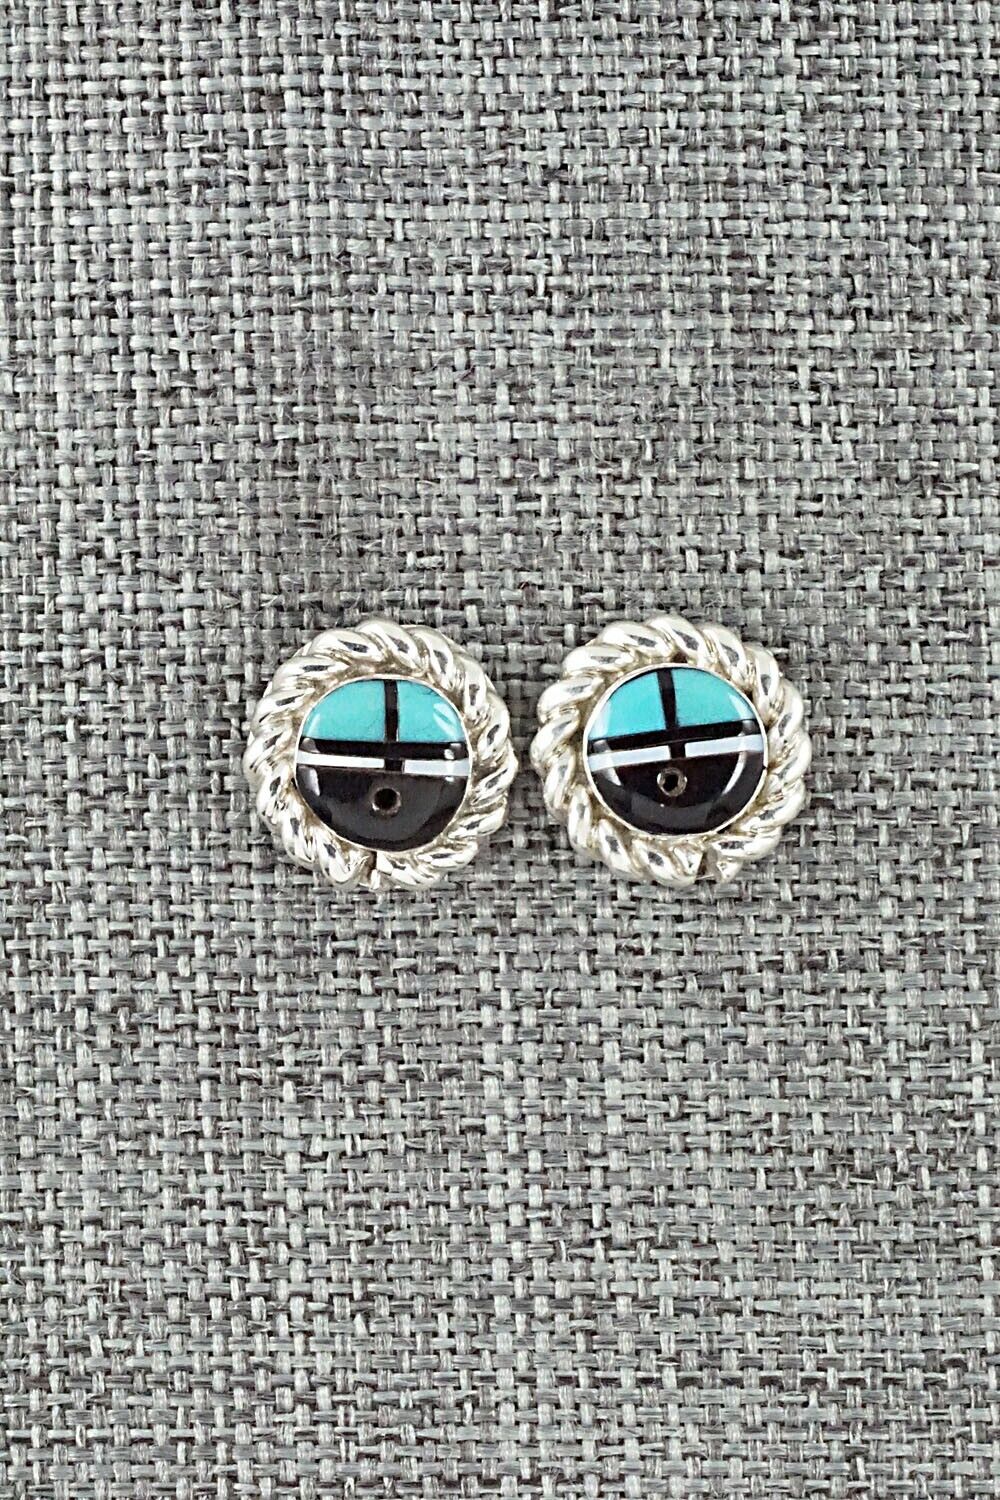 Multi Stone Inlay & Sterling Silver Earrings - Dave Lalio